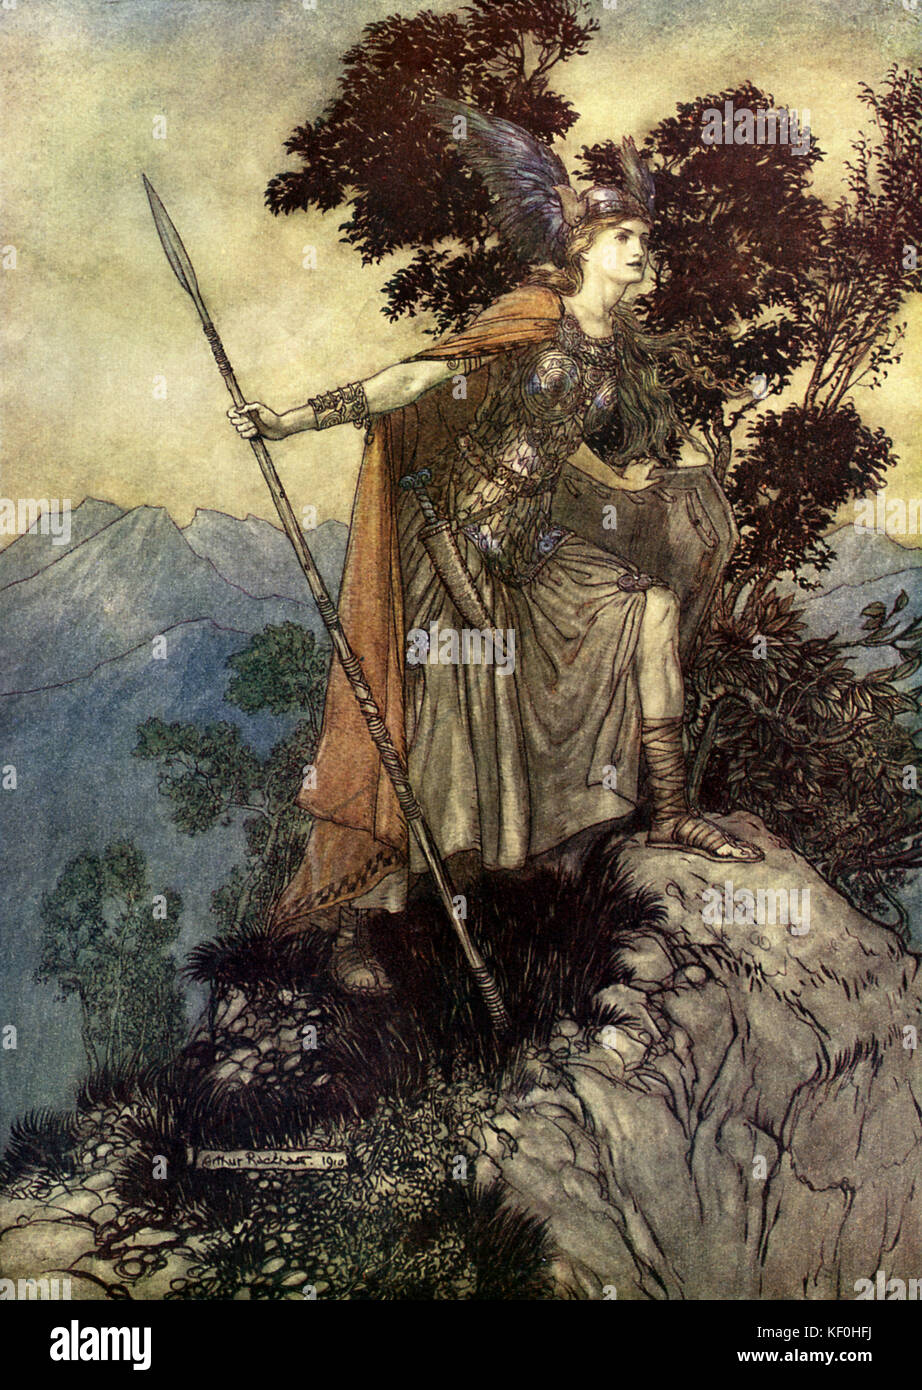 The Valkyrie / Das Walküre by Richard Wagner. The valkyrie Brünnhilde.  Illustration by Arthur Rackham 1867 - 1939.  Caption:  'Brünhilde' Act 2.  From 'The Ring Cycle' / 'Der Ring des Nibelungen'.  RW German composer & author, 22 May 1813 - 13 February 1883. Stock Photo